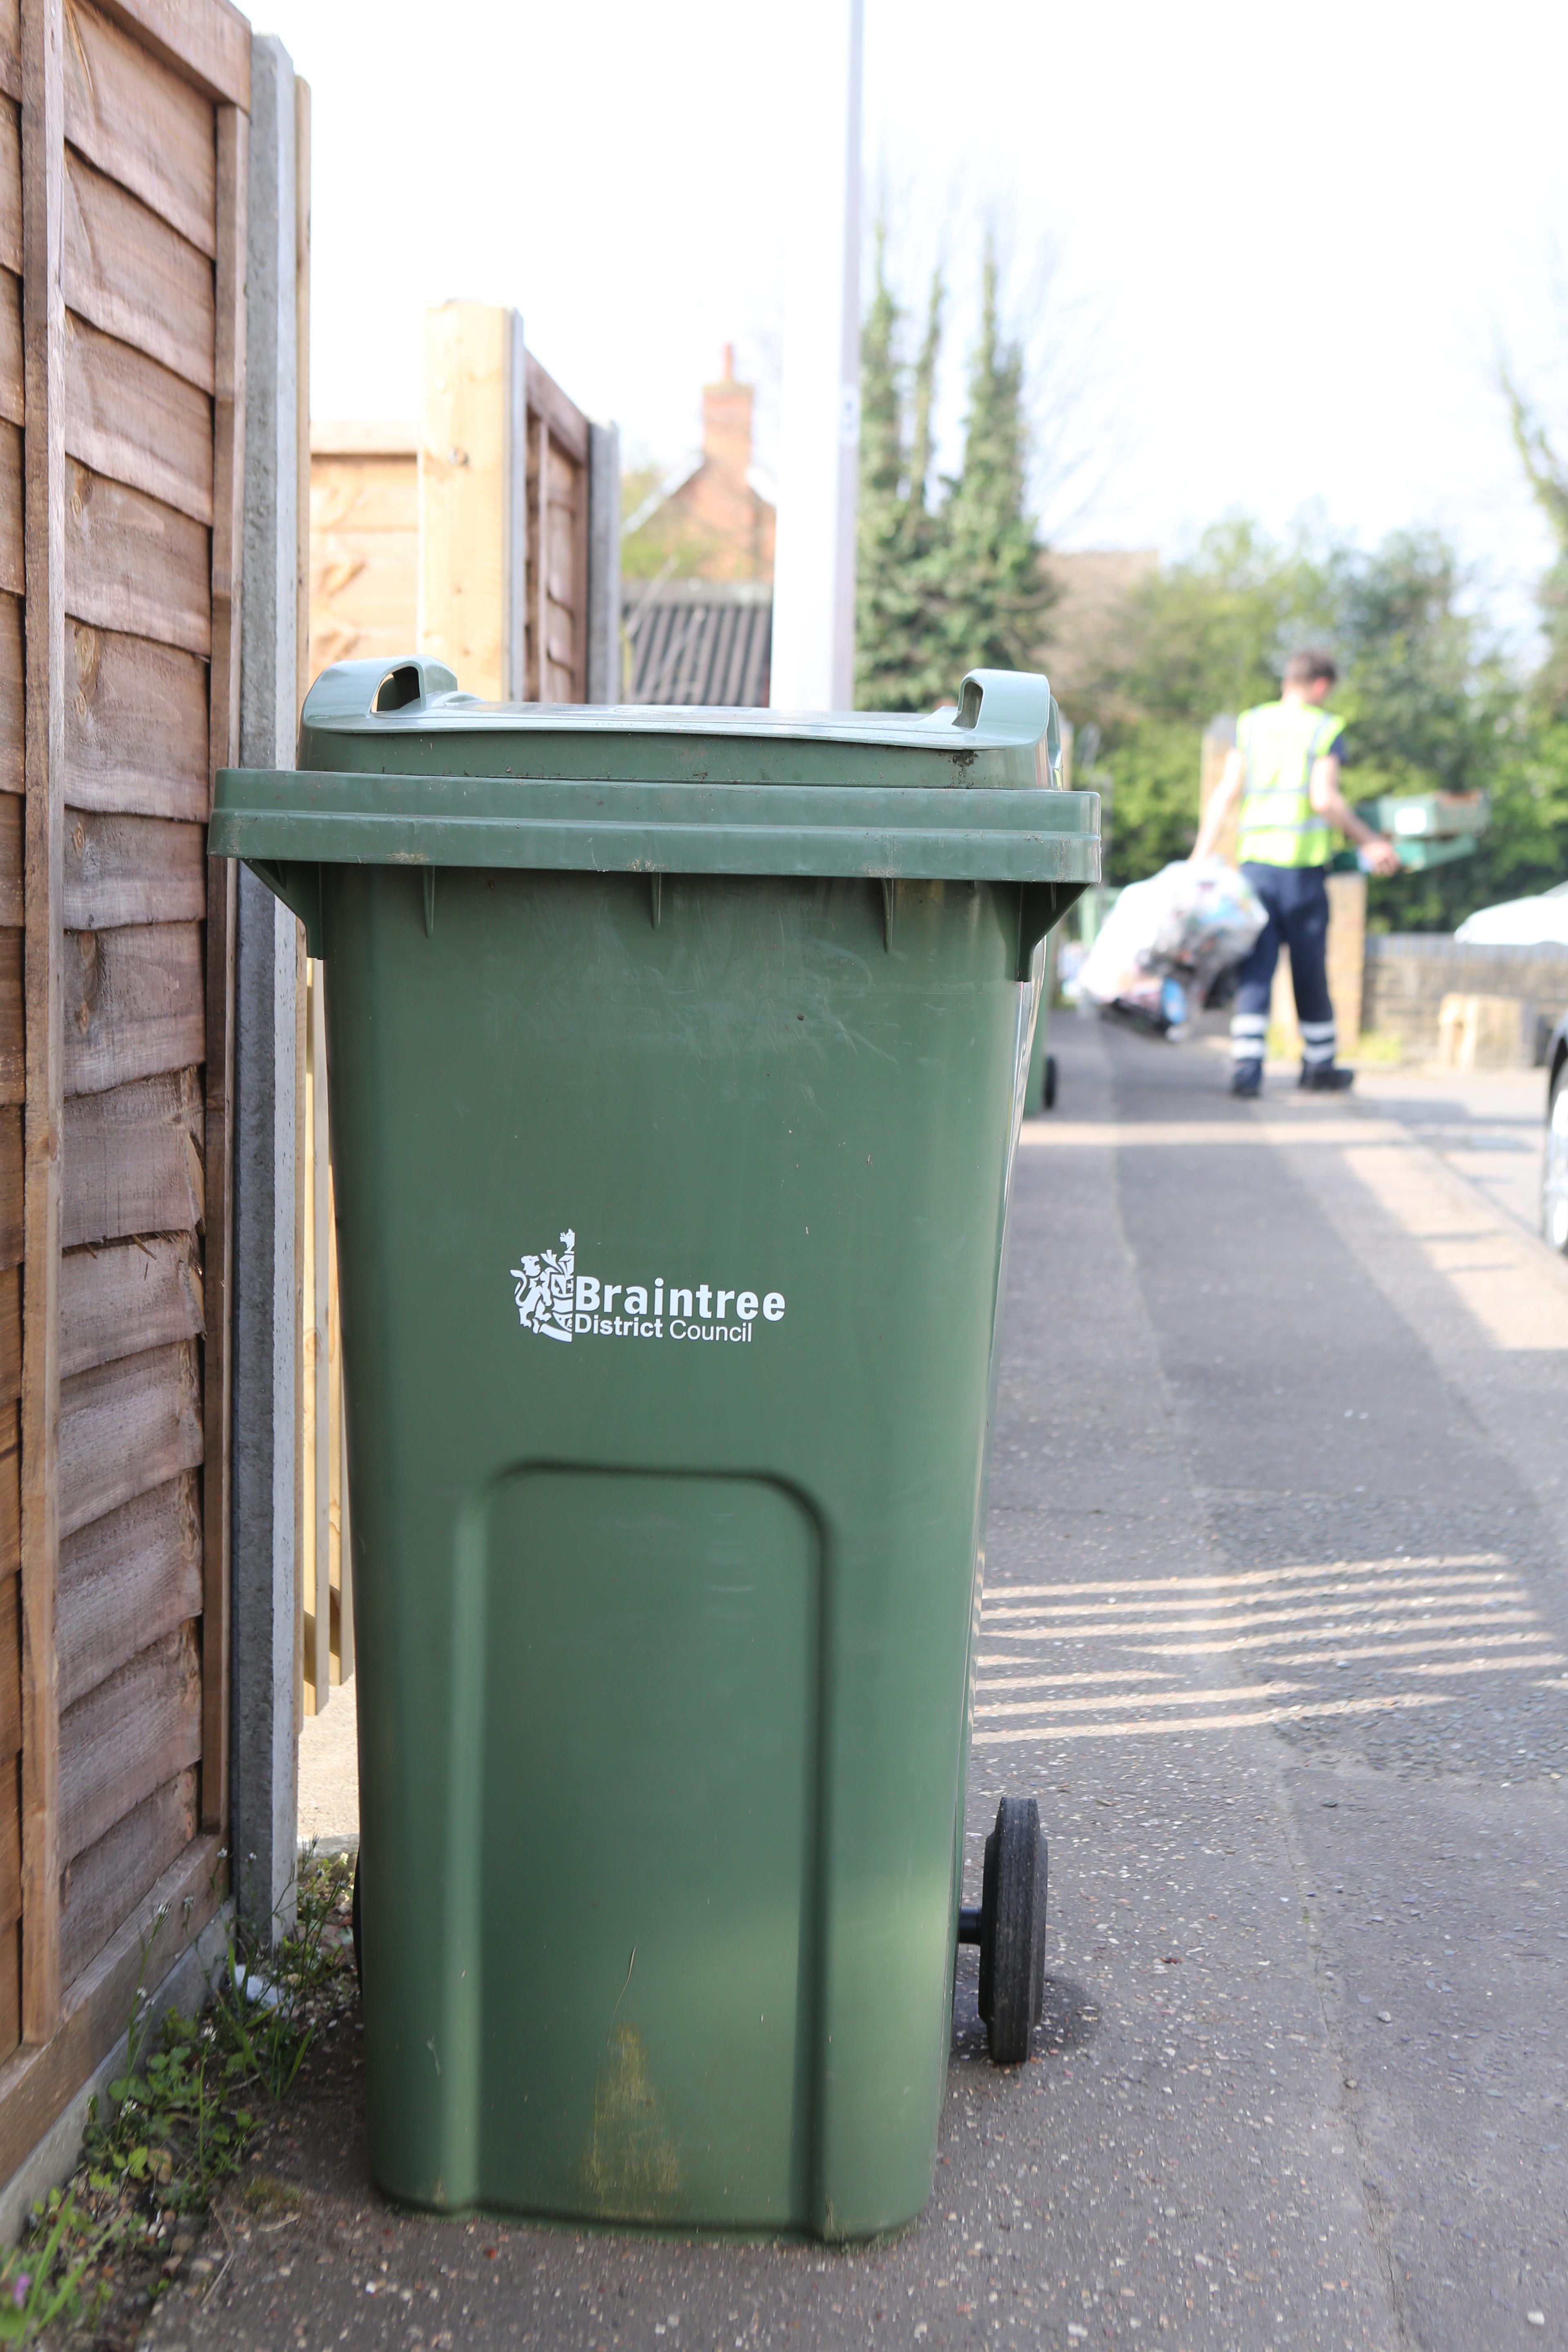 image shows green bin presented ready for collection of garden waste